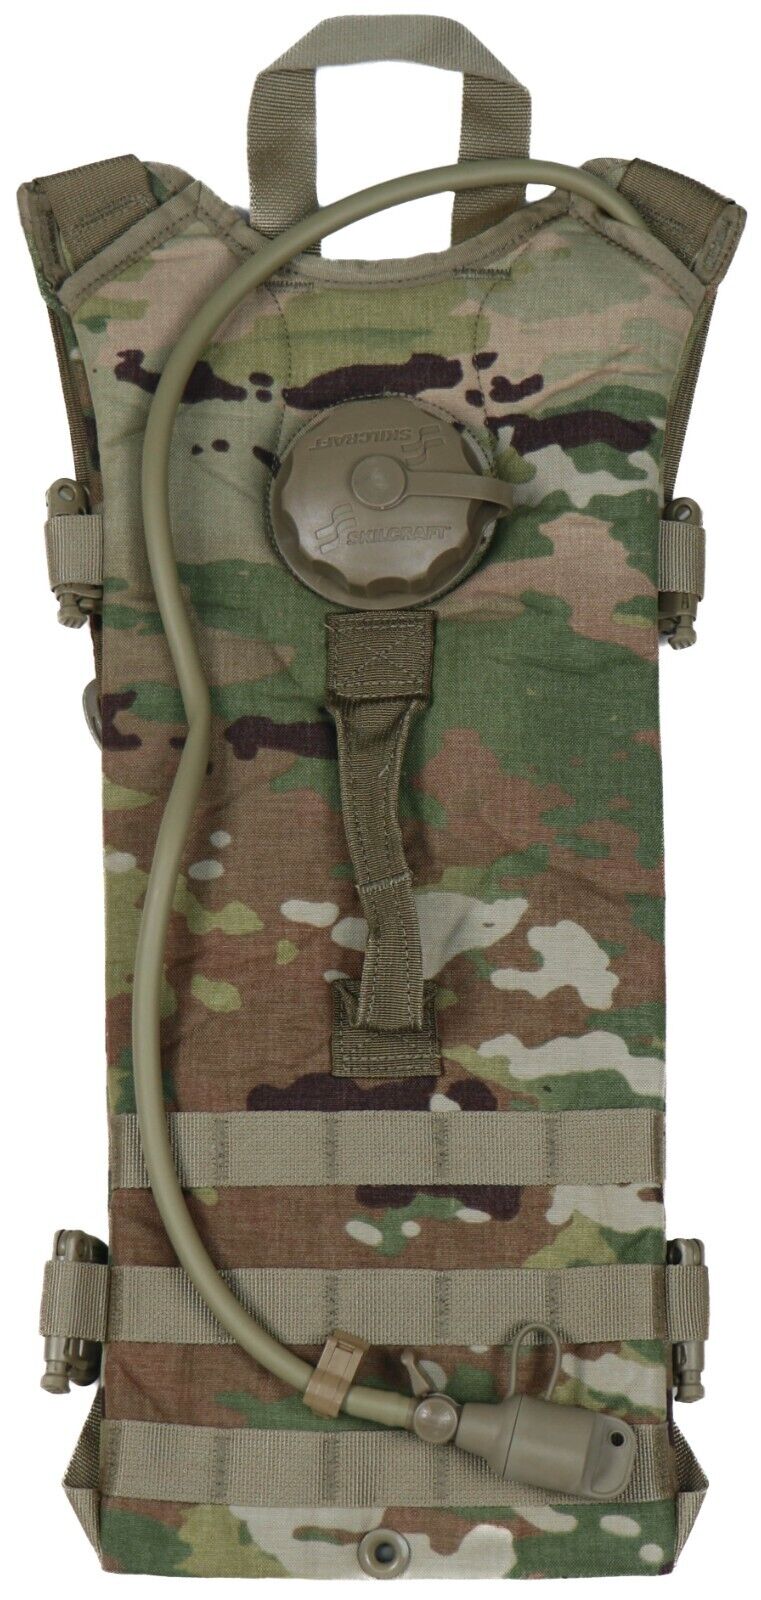 USED US OCP Multicam Molle II Hydration System Carrier Water Backpack W Bladder